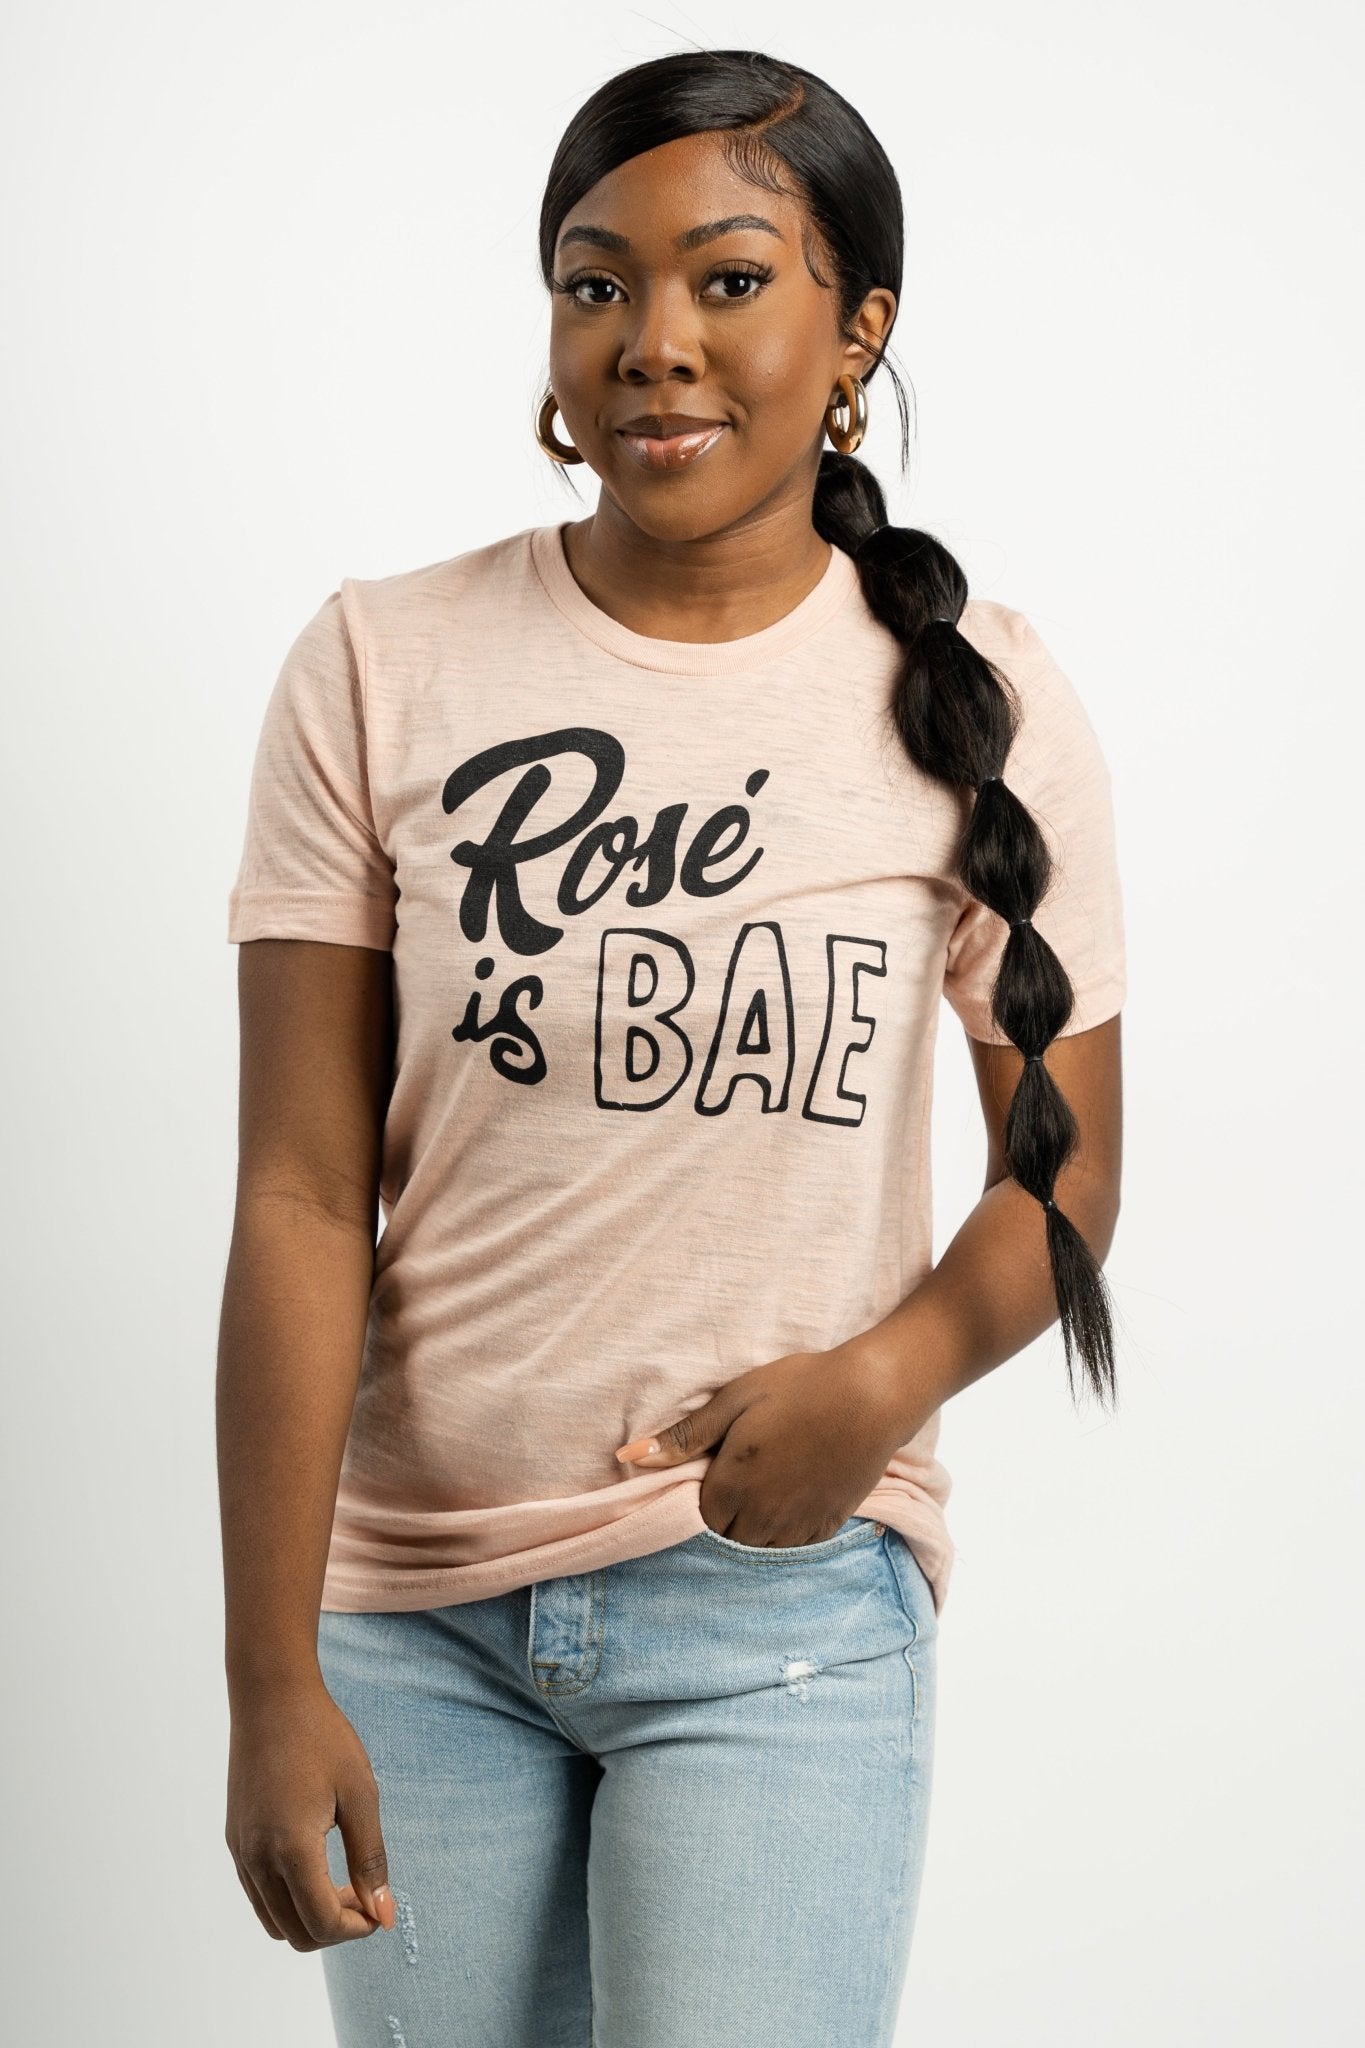 Rose is bae unisex short sleeve t-shirt peach - Cute T-shirts - Funny T-Shirts at Lush Fashion Lounge Boutique in Oklahoma City